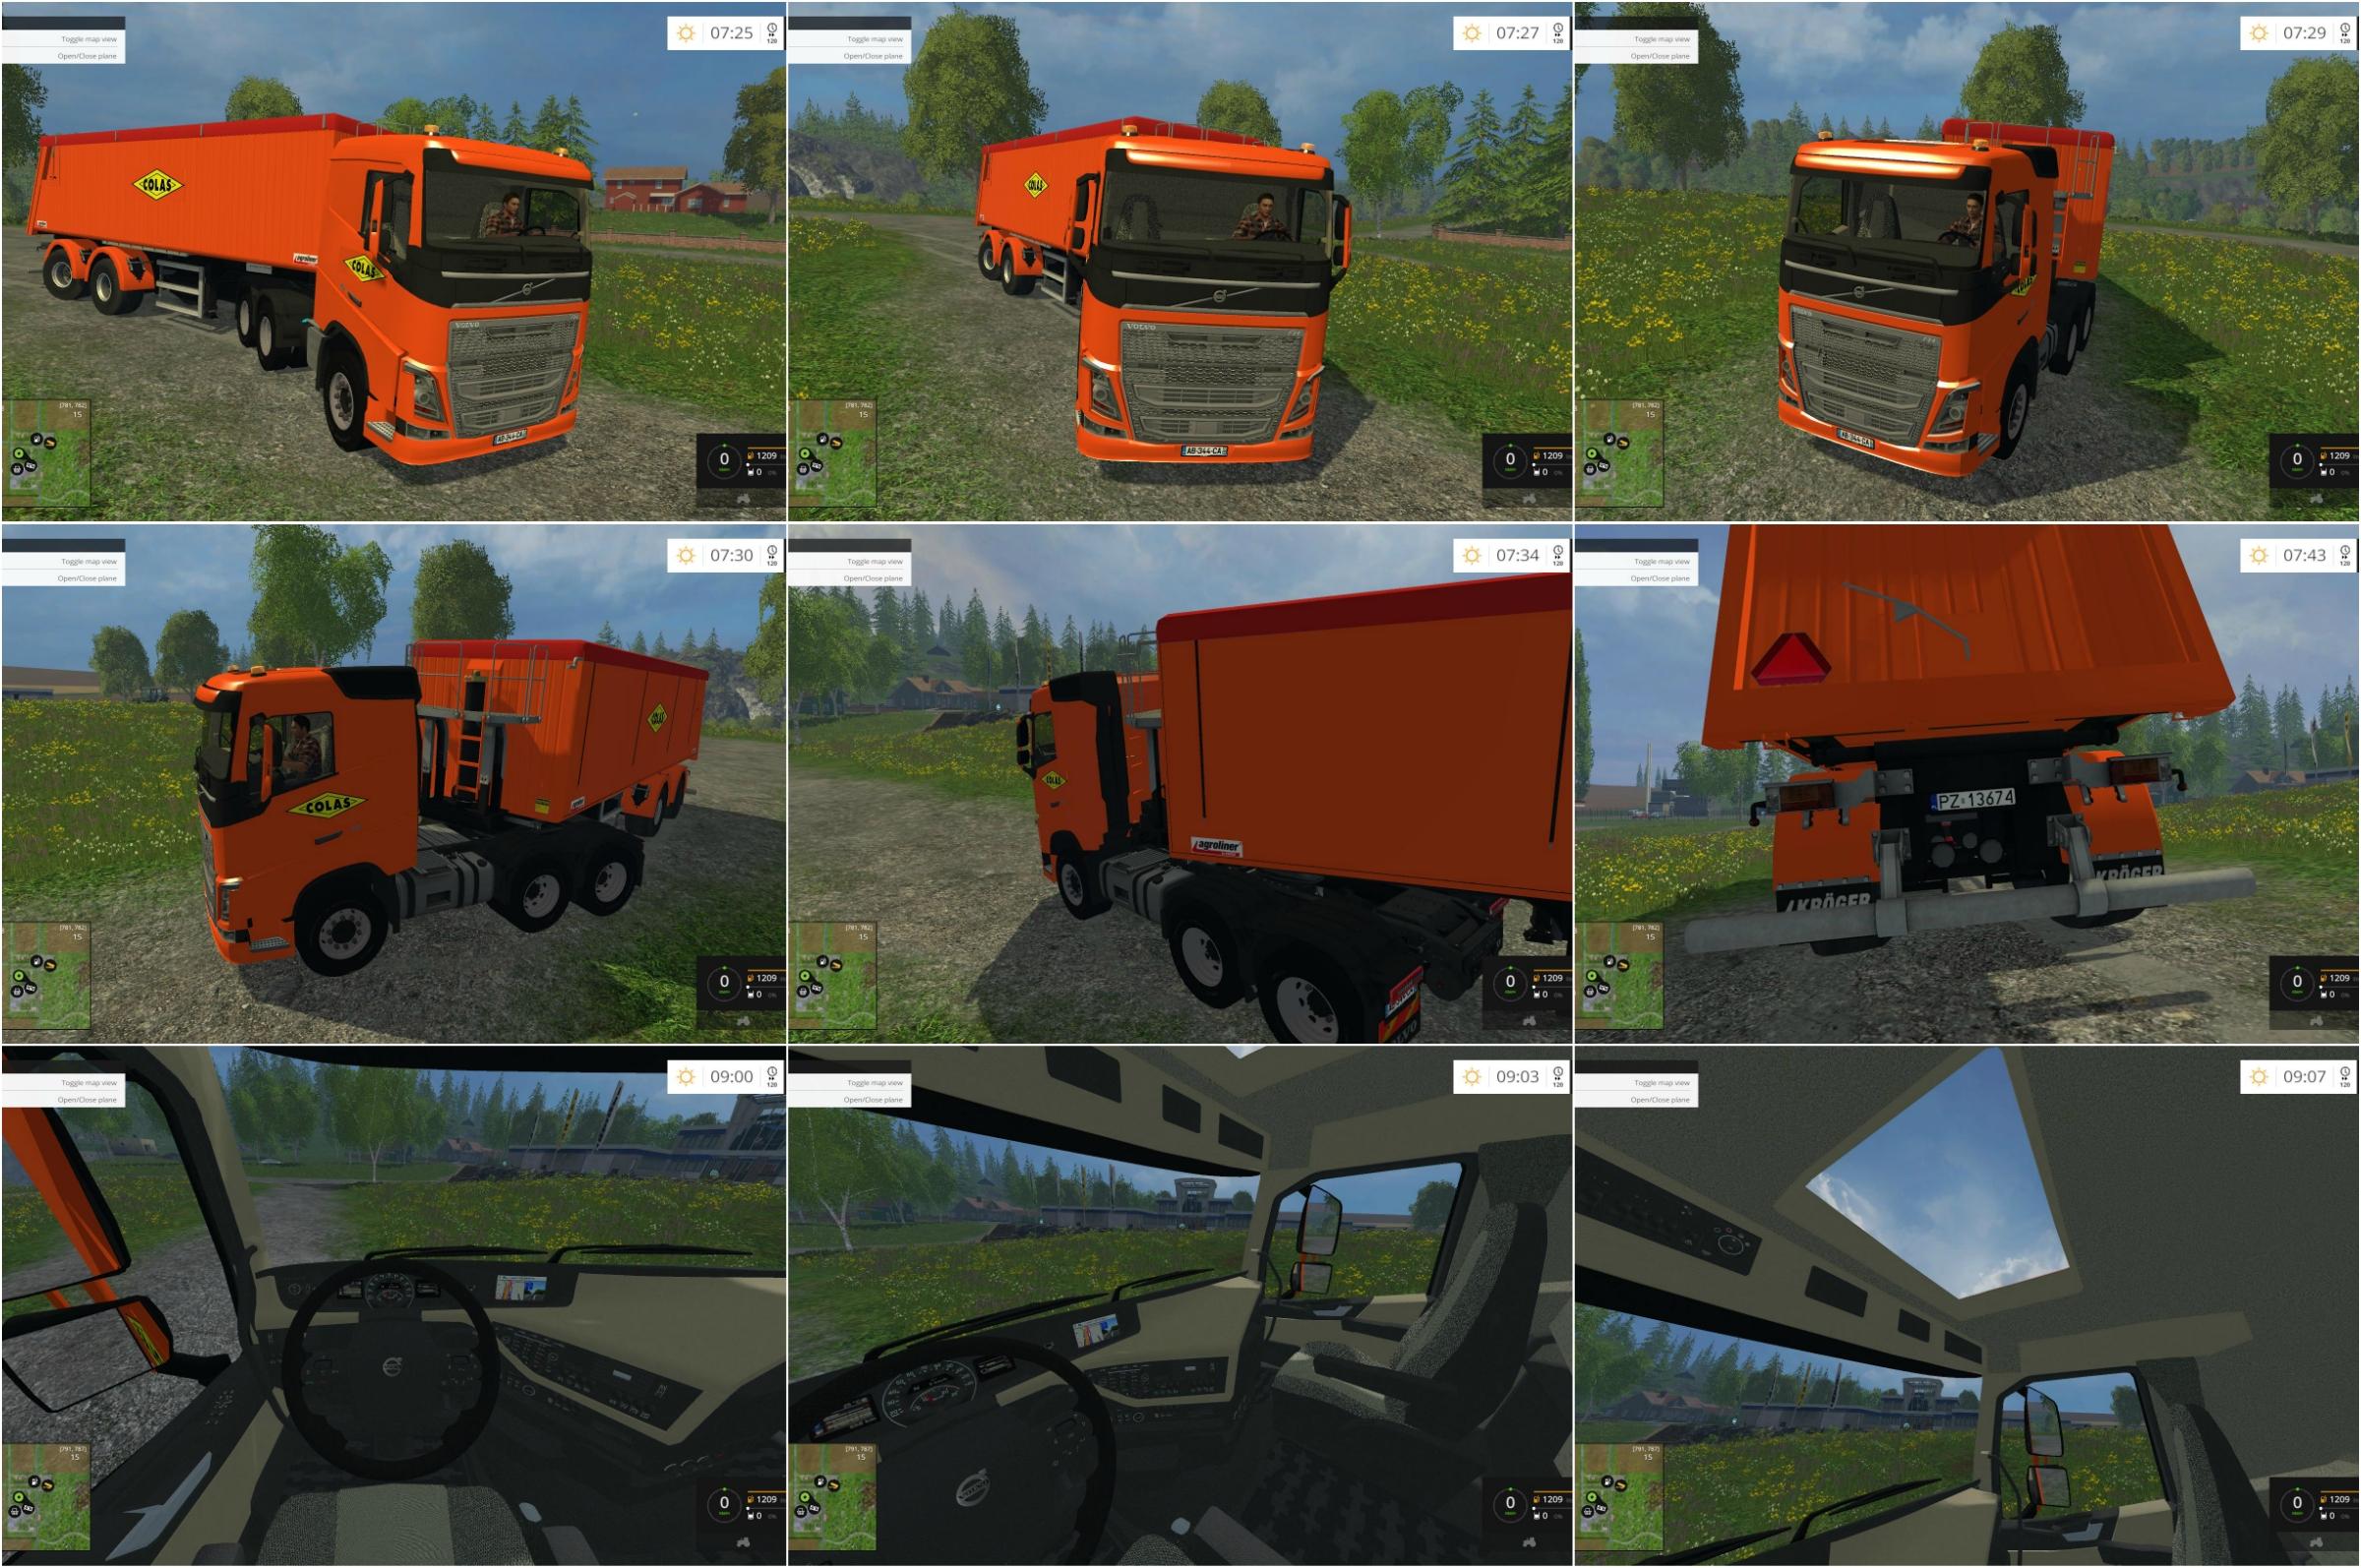 ls15colascollectiontfsgroup v1 0 5 LS 2015 COLAS COLLECTION TFSGROUP V1.0